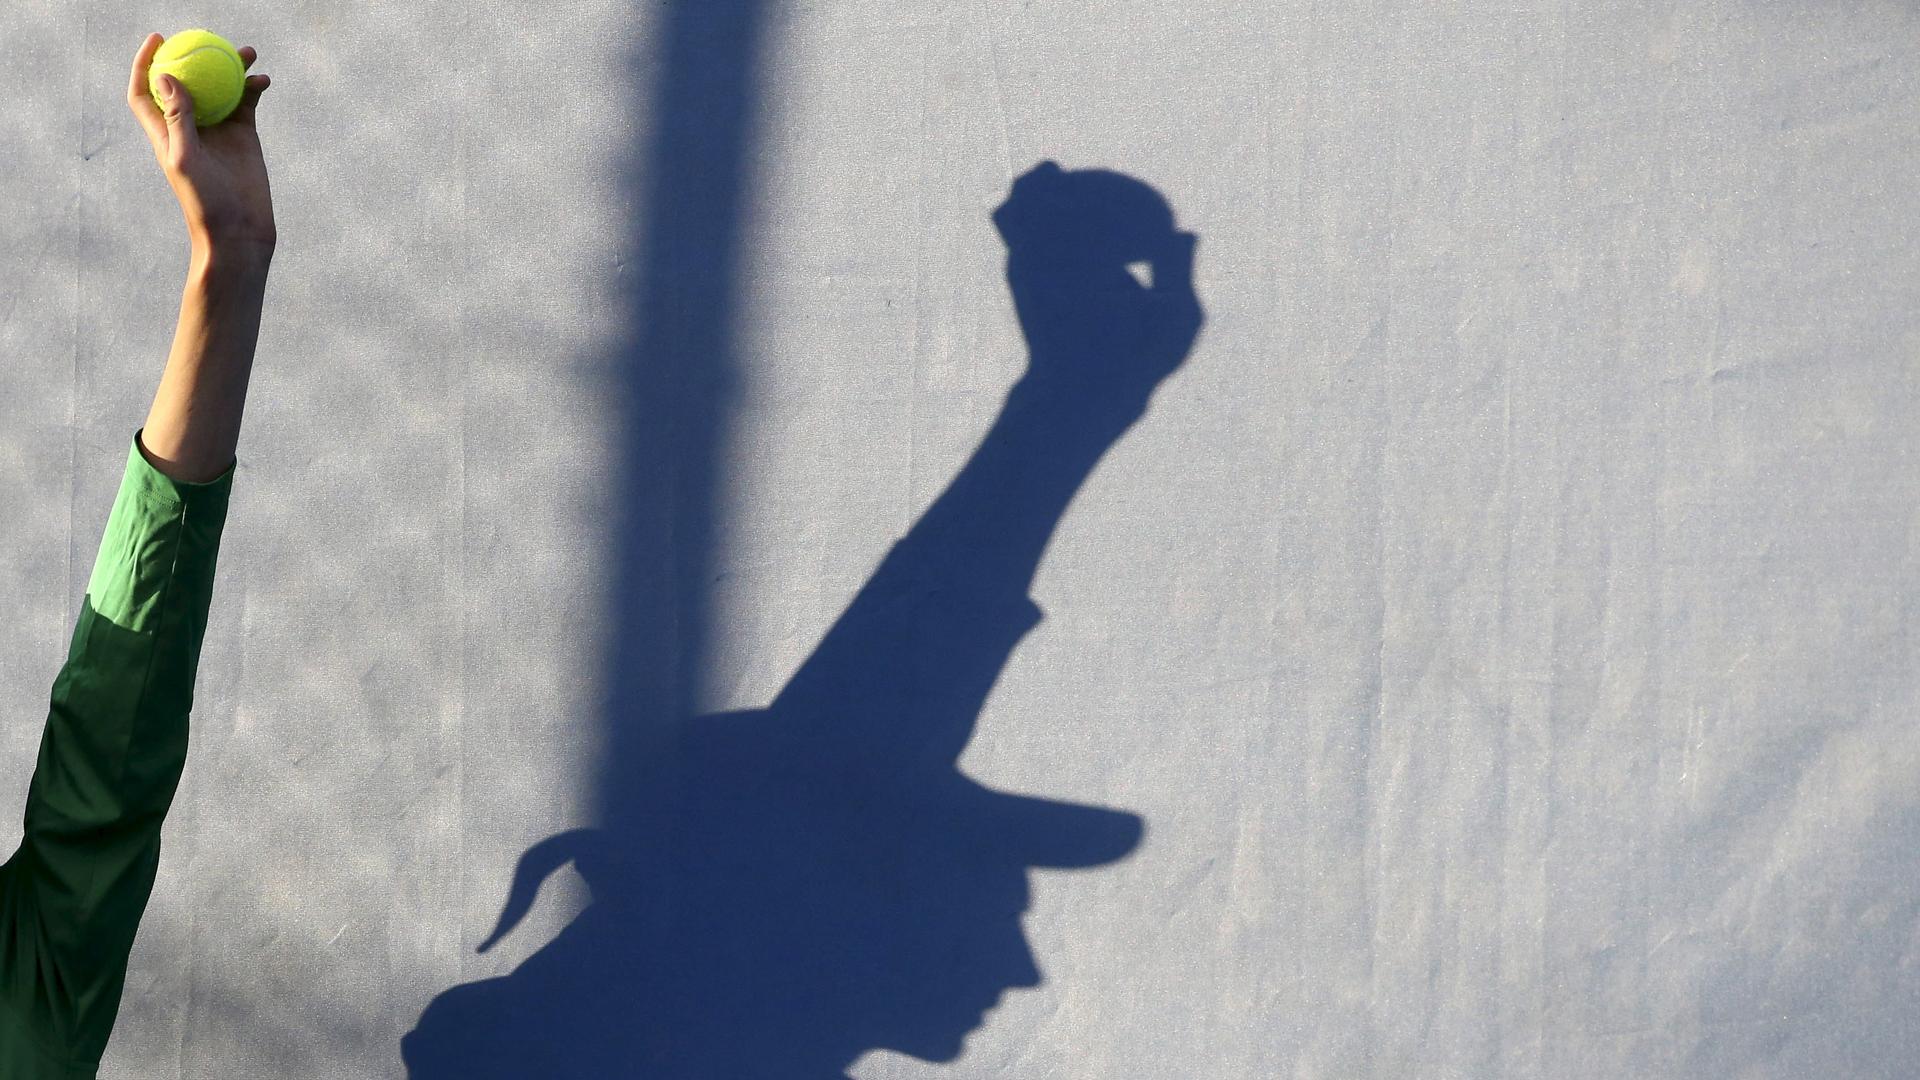 A ball boy is silhouetted as he holds up a tennis ball during a match at the Australian Open tennis tournament at Melbourne Park, Australia, January 18, 2016.